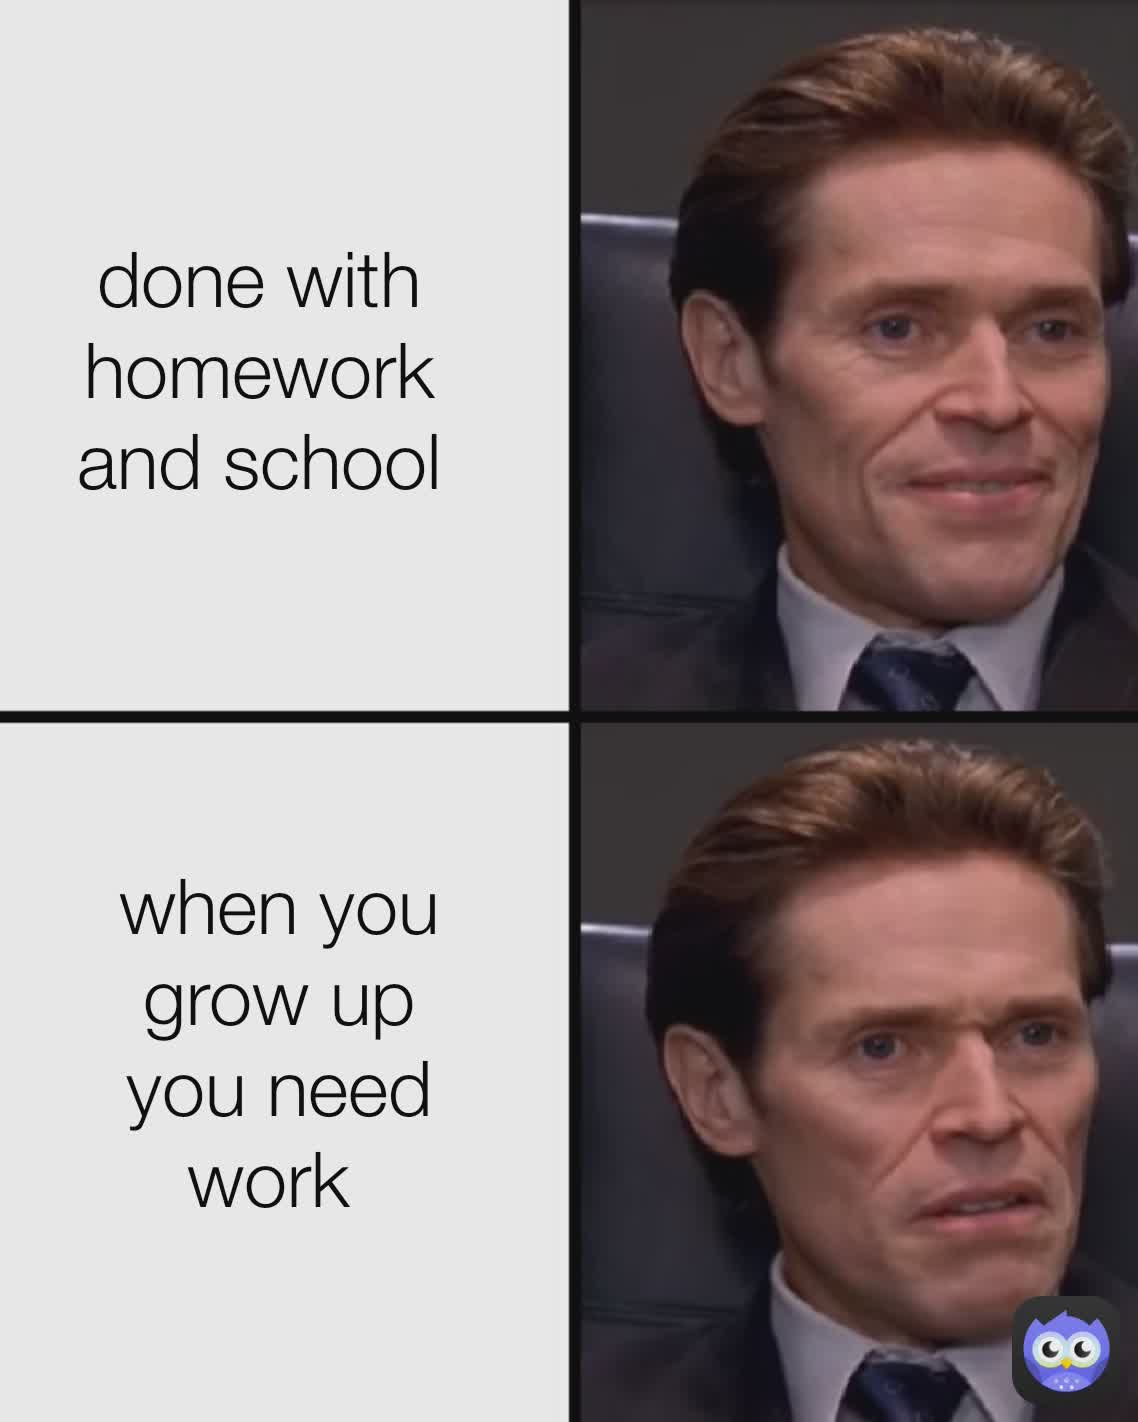 done with homework and school when you grow up
you need work 